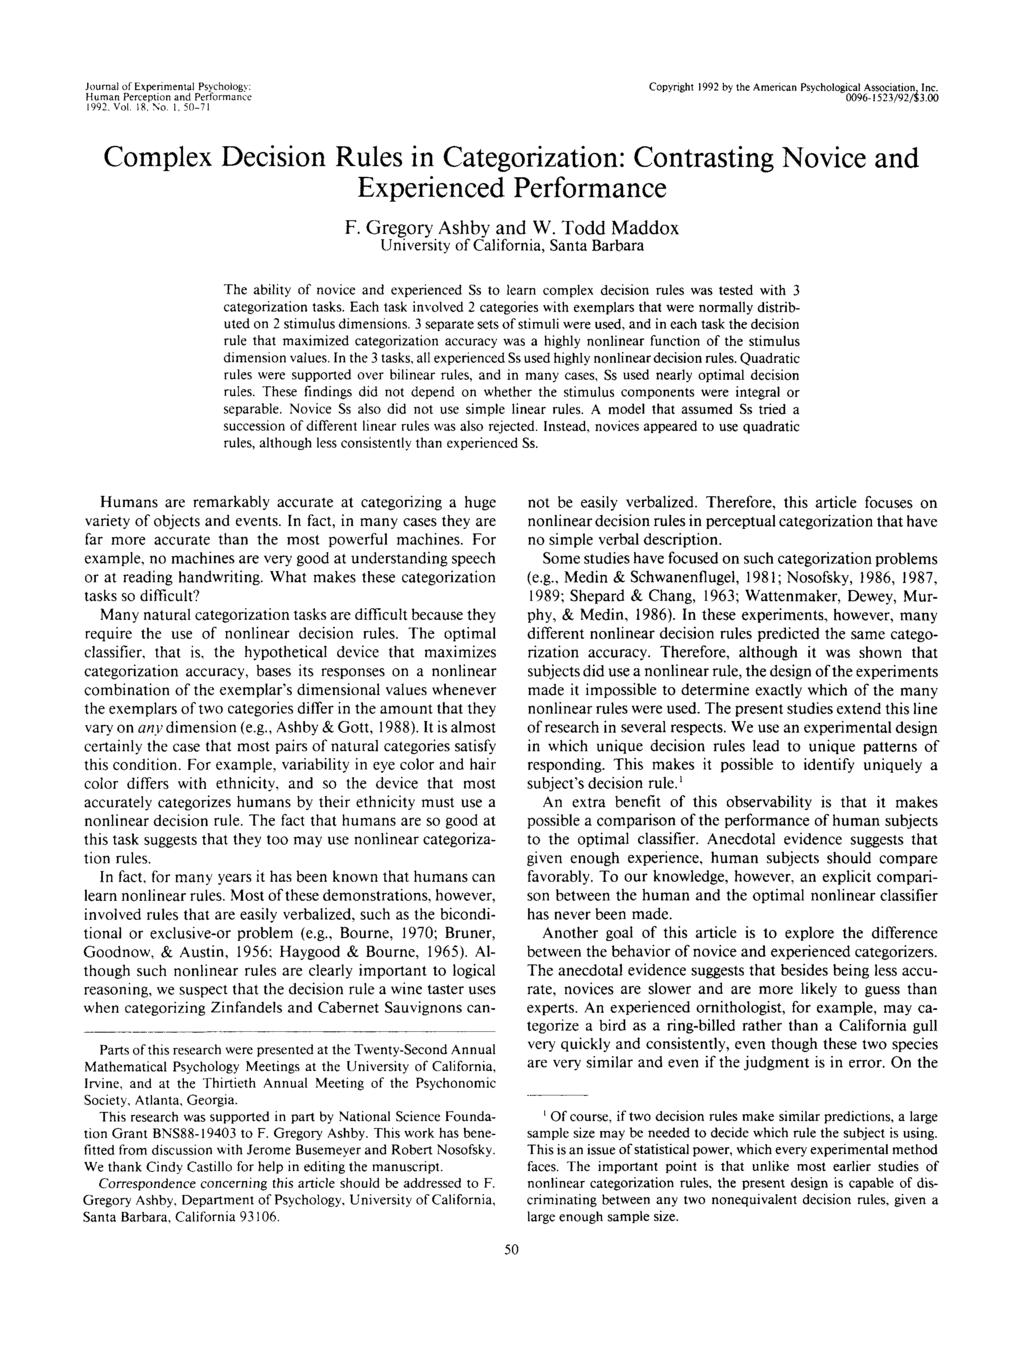 Journal of Experimental Psychology: Human Perception and Performance 199, Vol. 18, No. 1, 50-71 Copyright 199 by the American Psychological Association. Inc. 0096-15 3/9/S3.